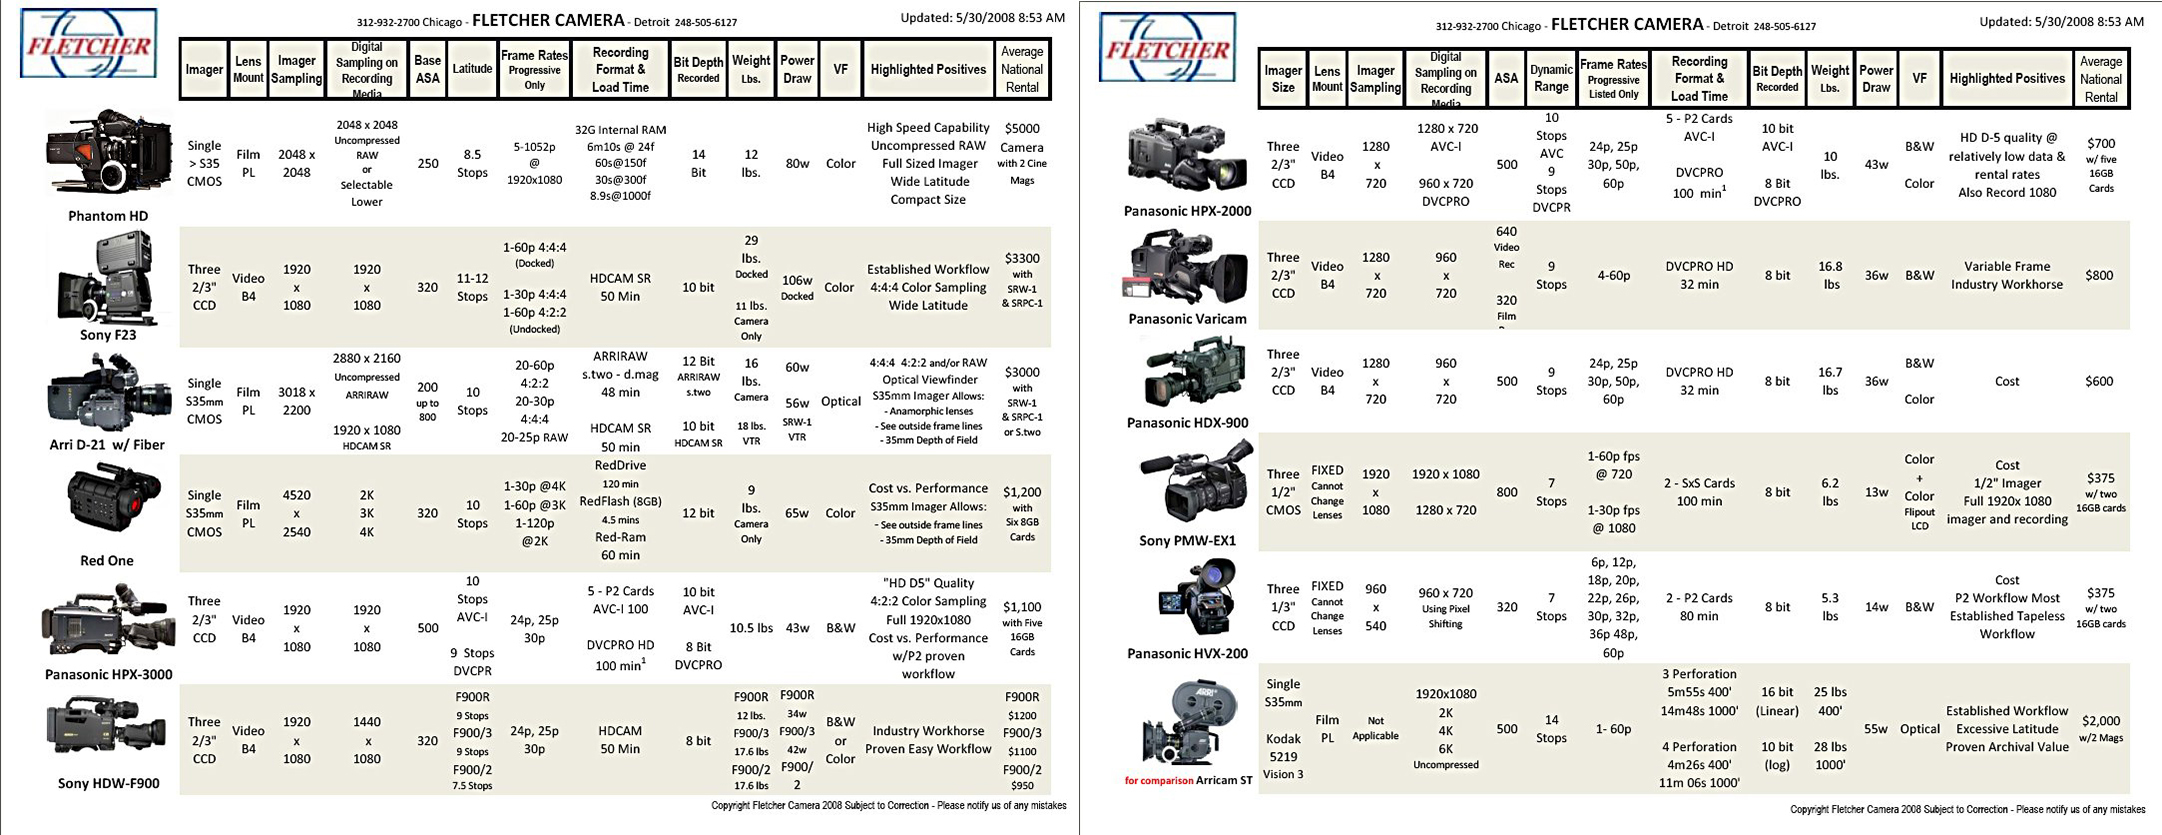 20 Camera Comparison Chart   UPDATED   The American Society of ...